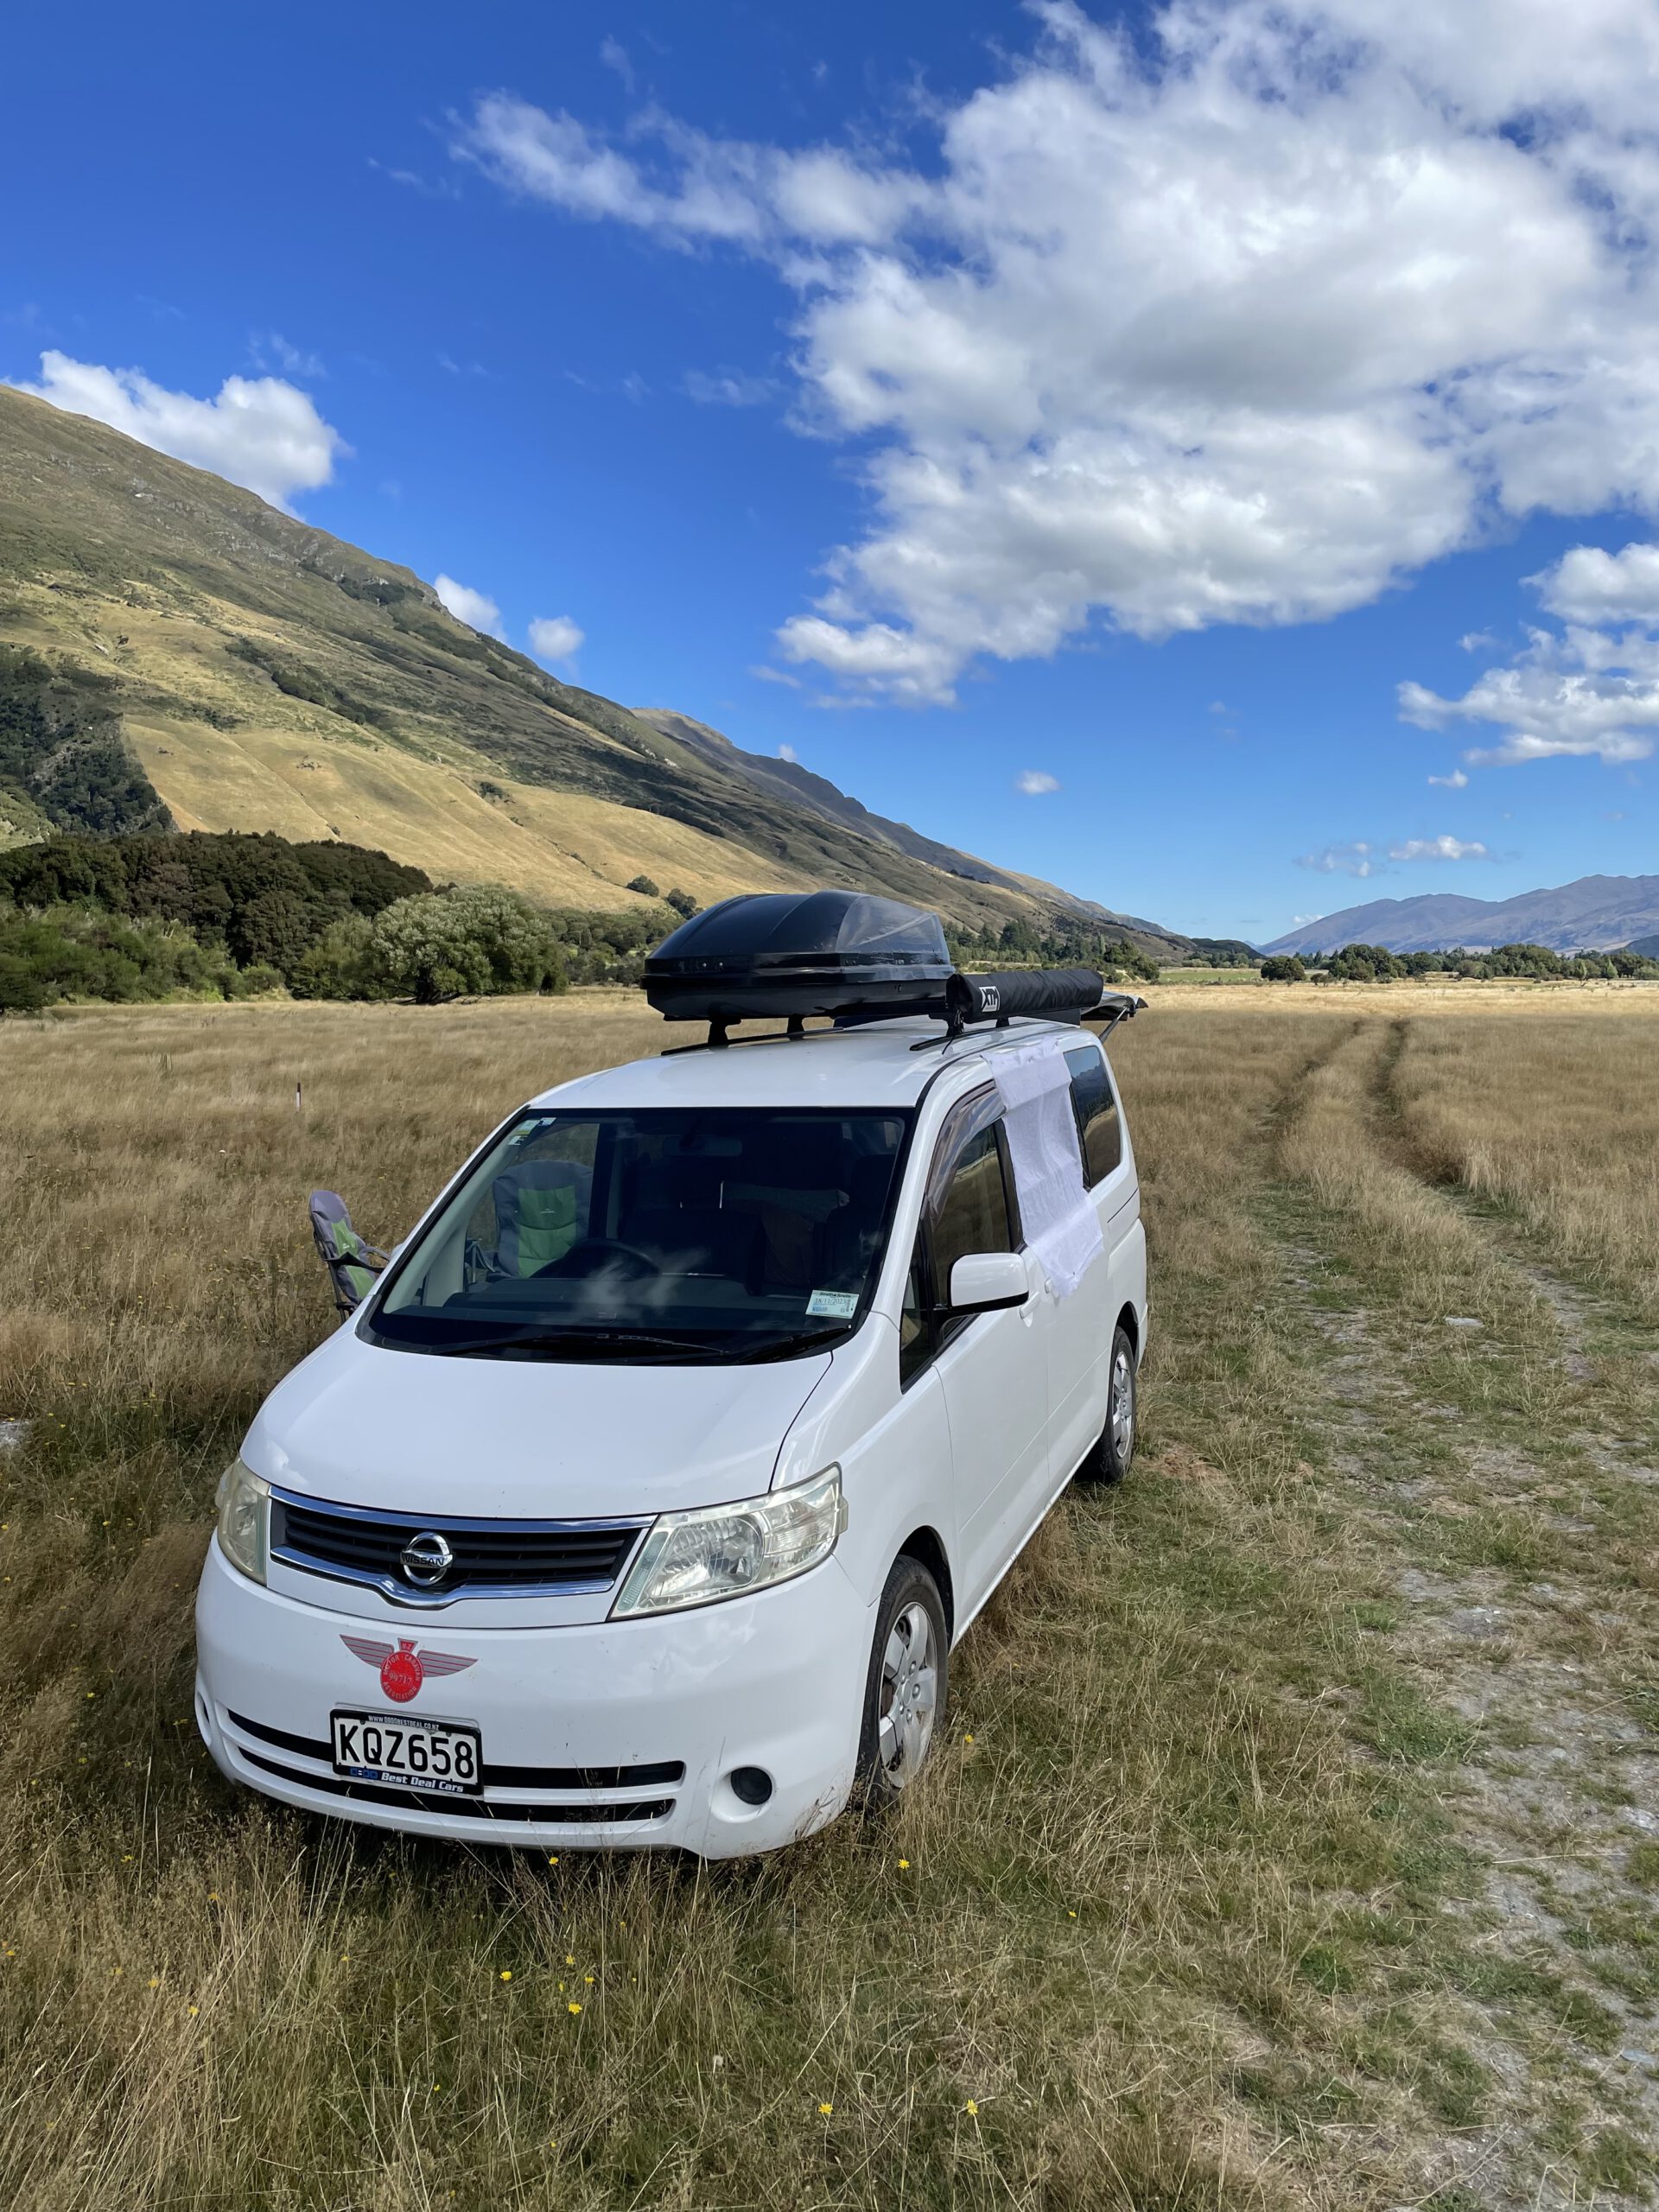 Campervan parked on the South Island New Zealand